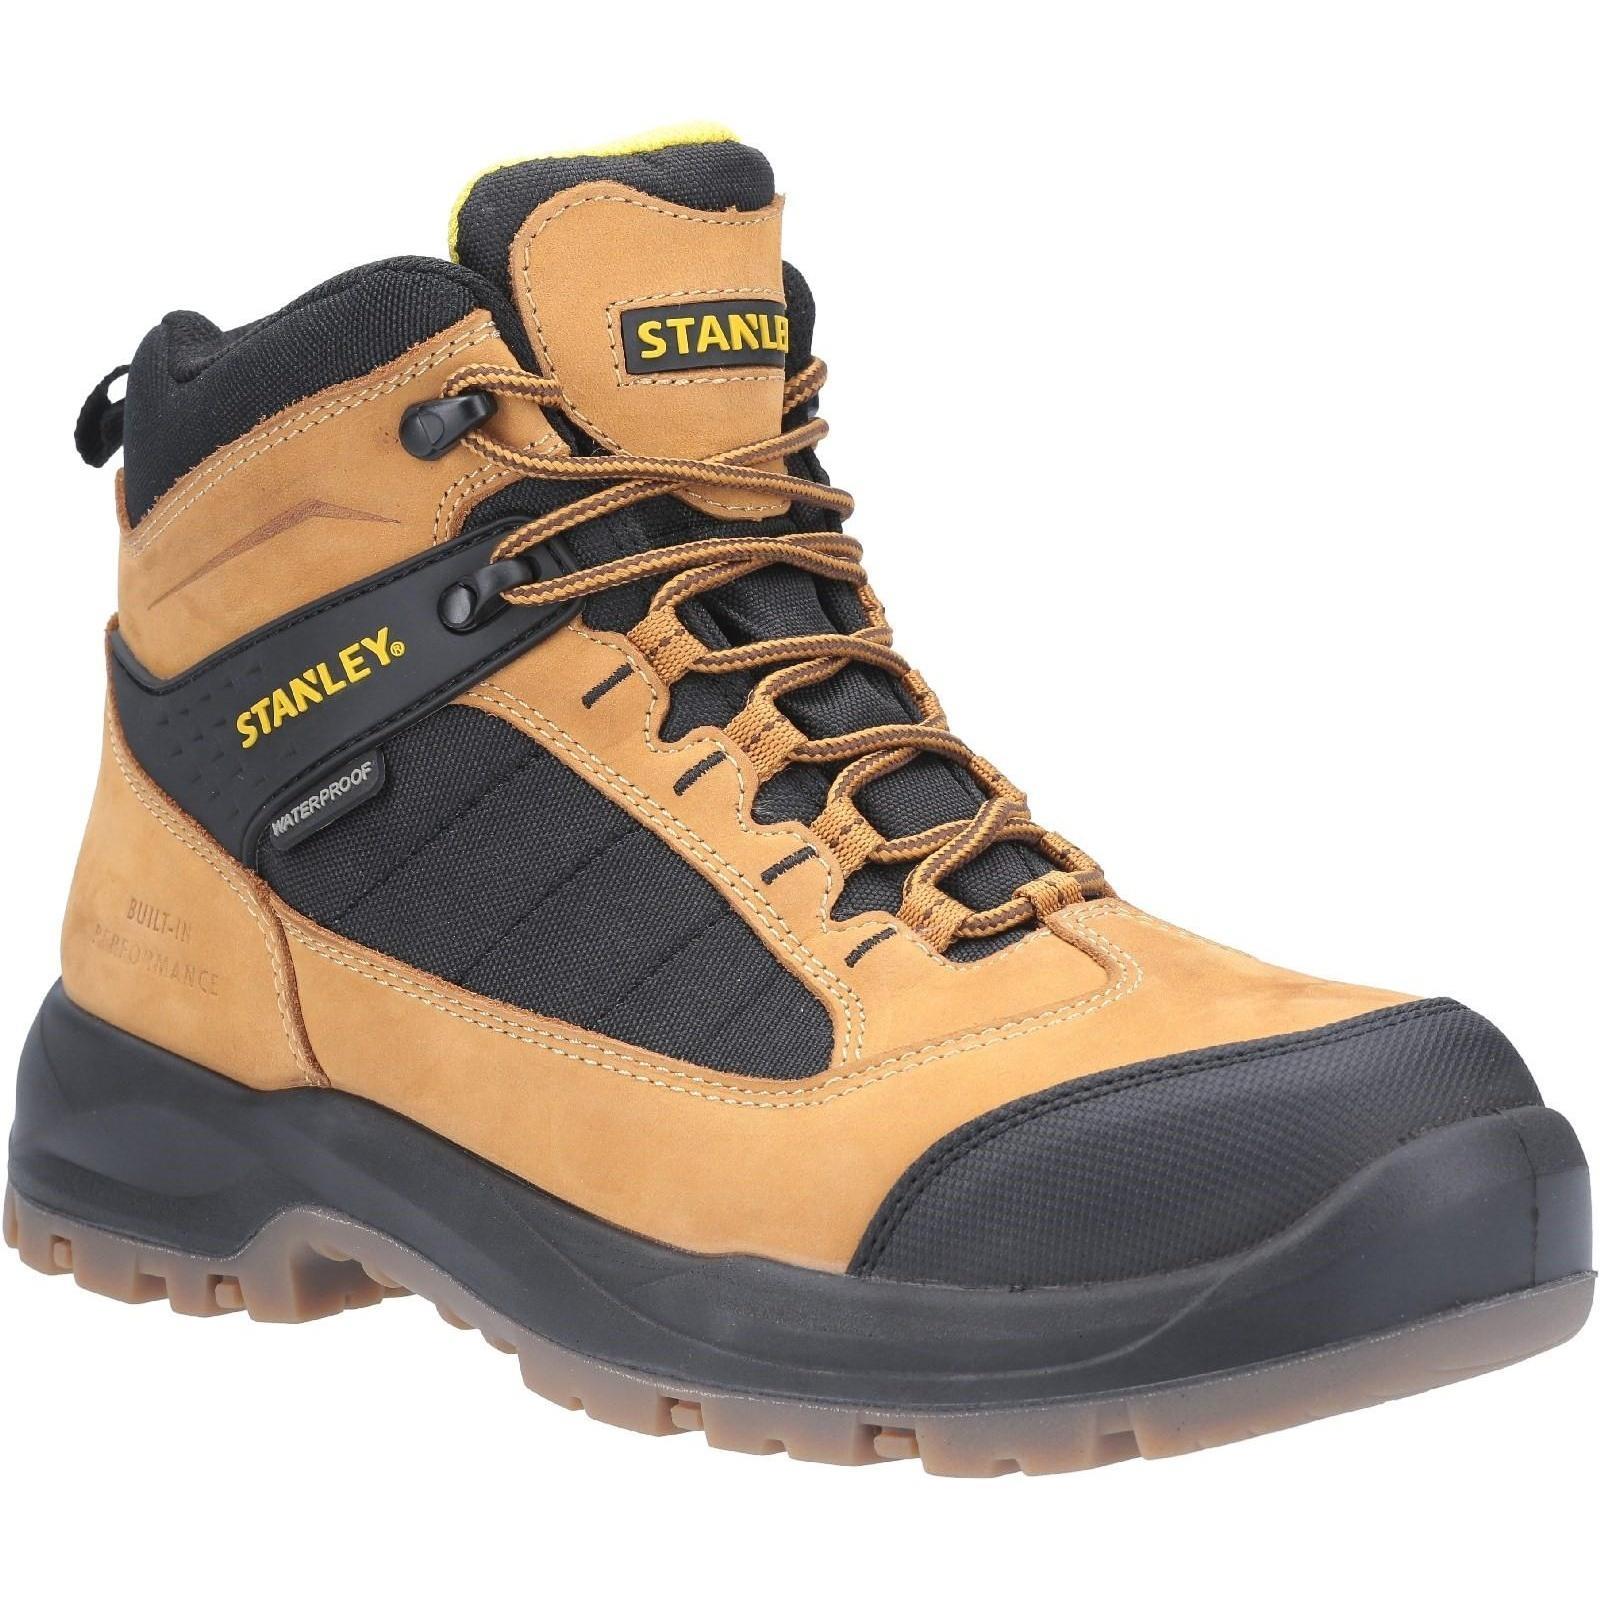 Stanley Mens Berkeley Full Lace Up Leather Safety Boot (Honey) (10 UK)